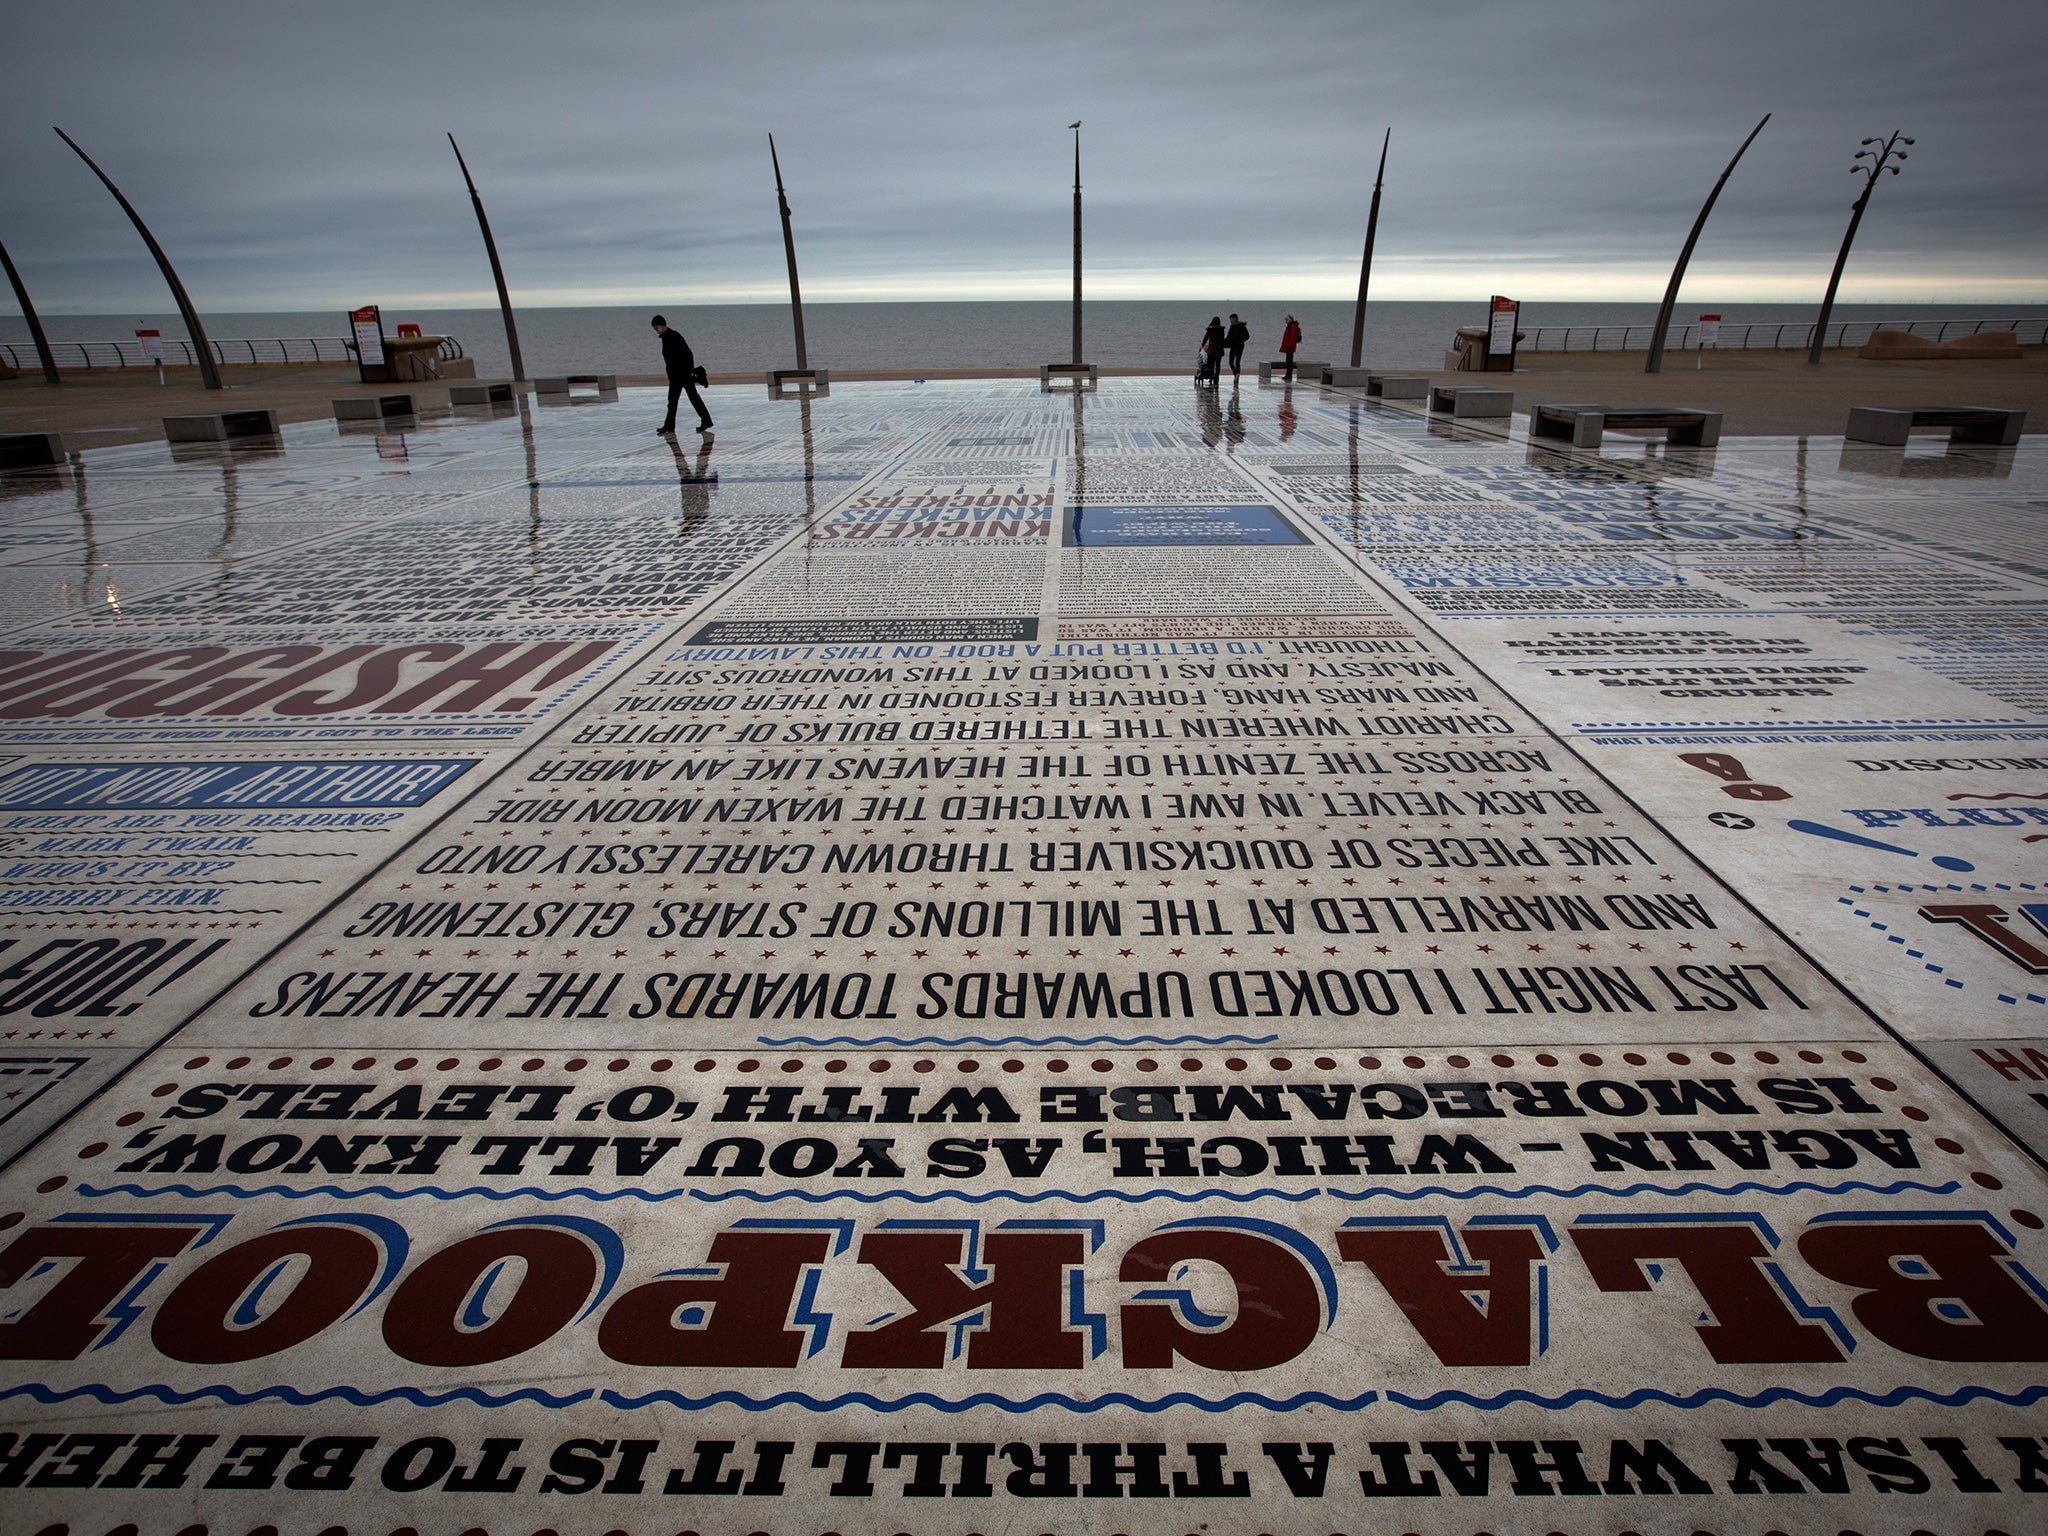 Visitors walking past Gordon Young’s ‘Comedy Carpet’ artwork in Blackpool